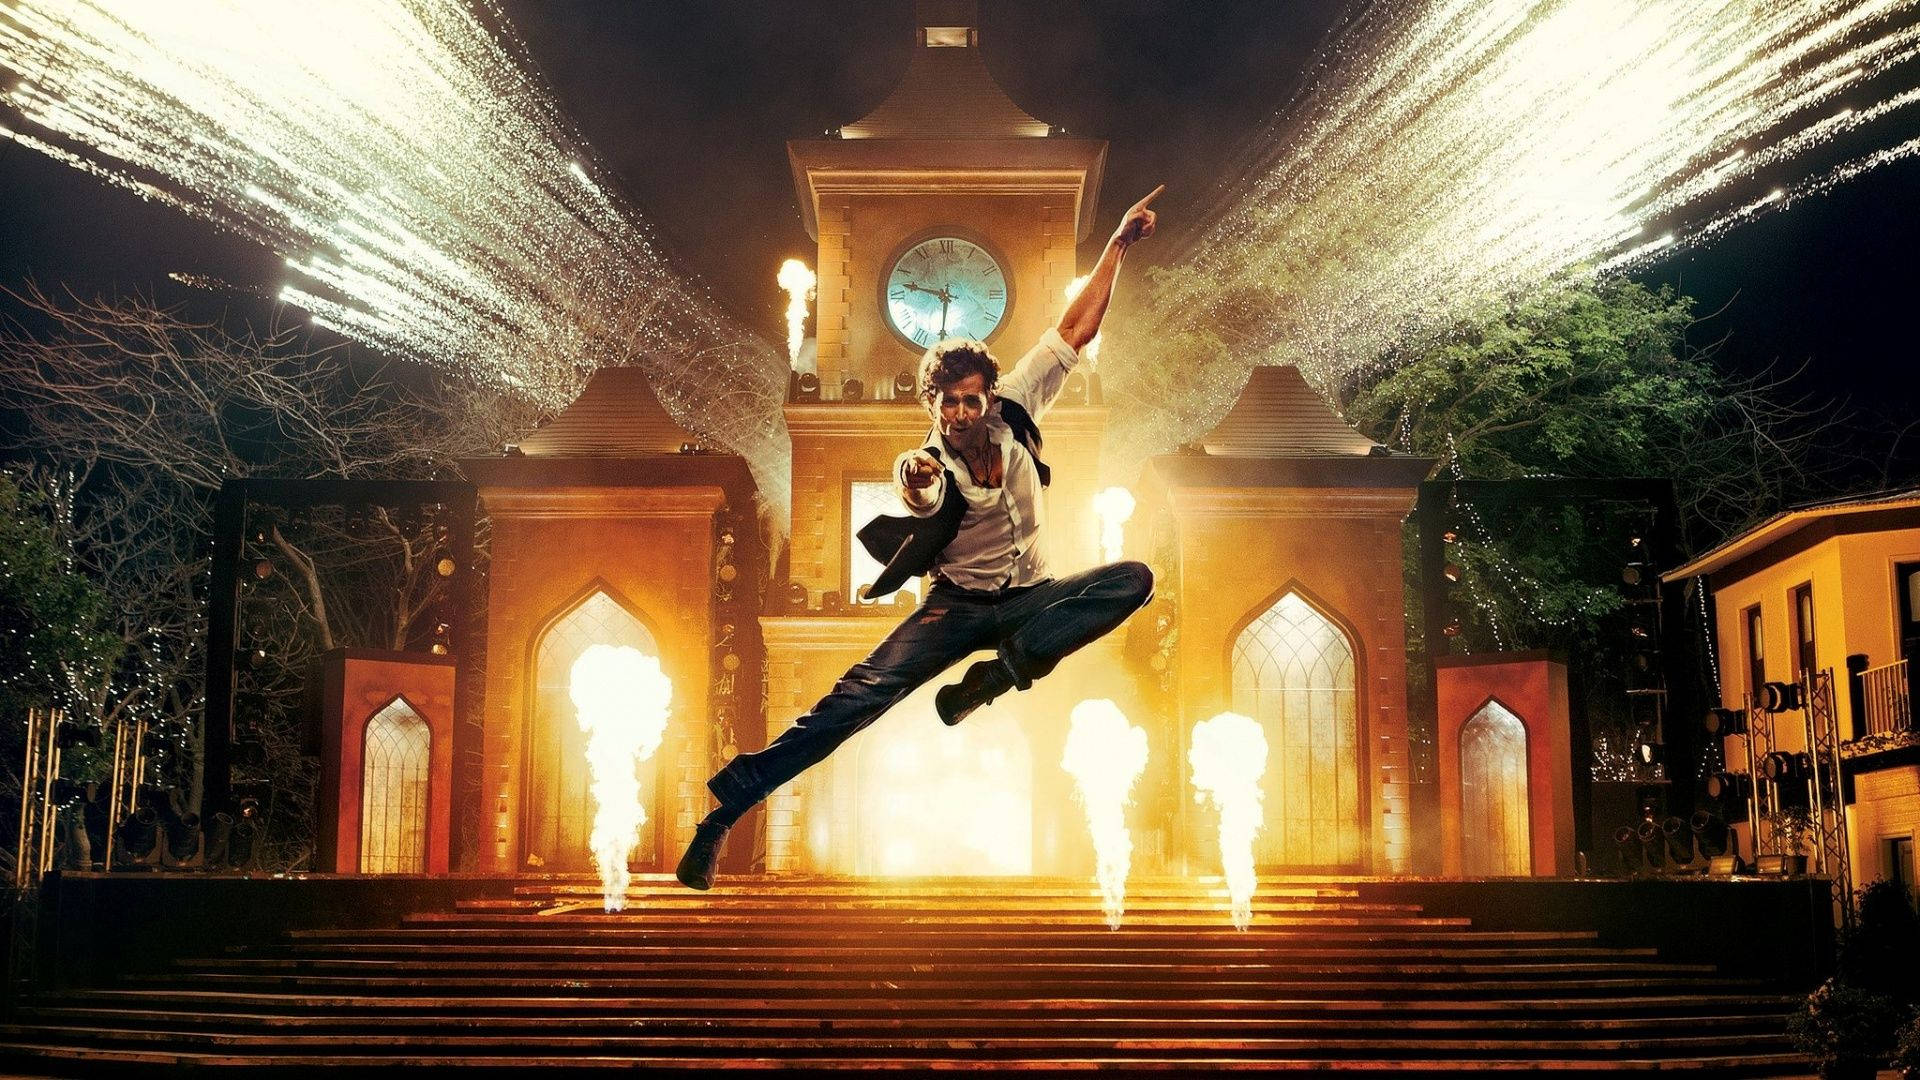 Hrithik Roshan Mid Air With Fireworks Background